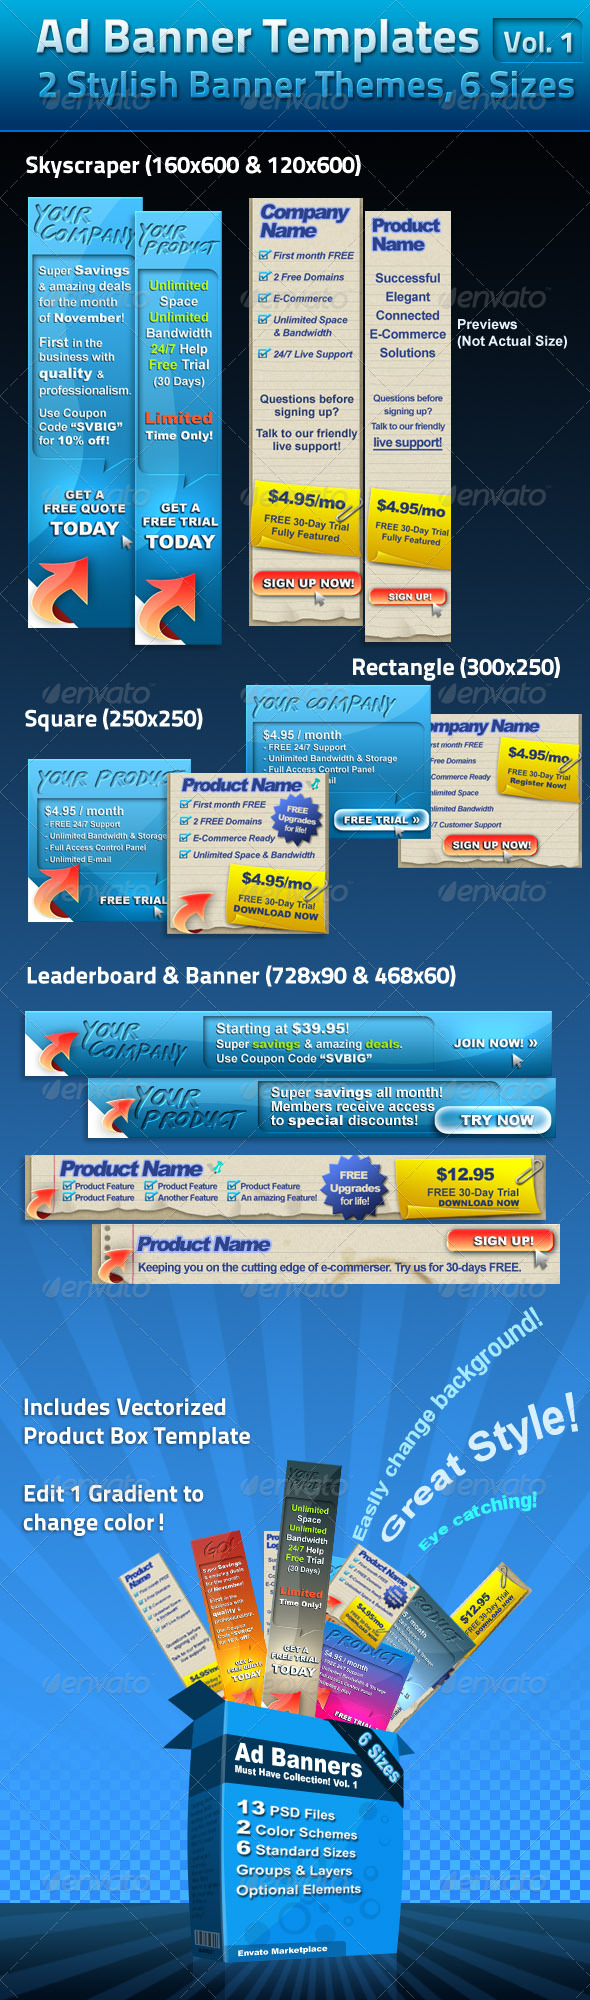 Banner Ad Templates